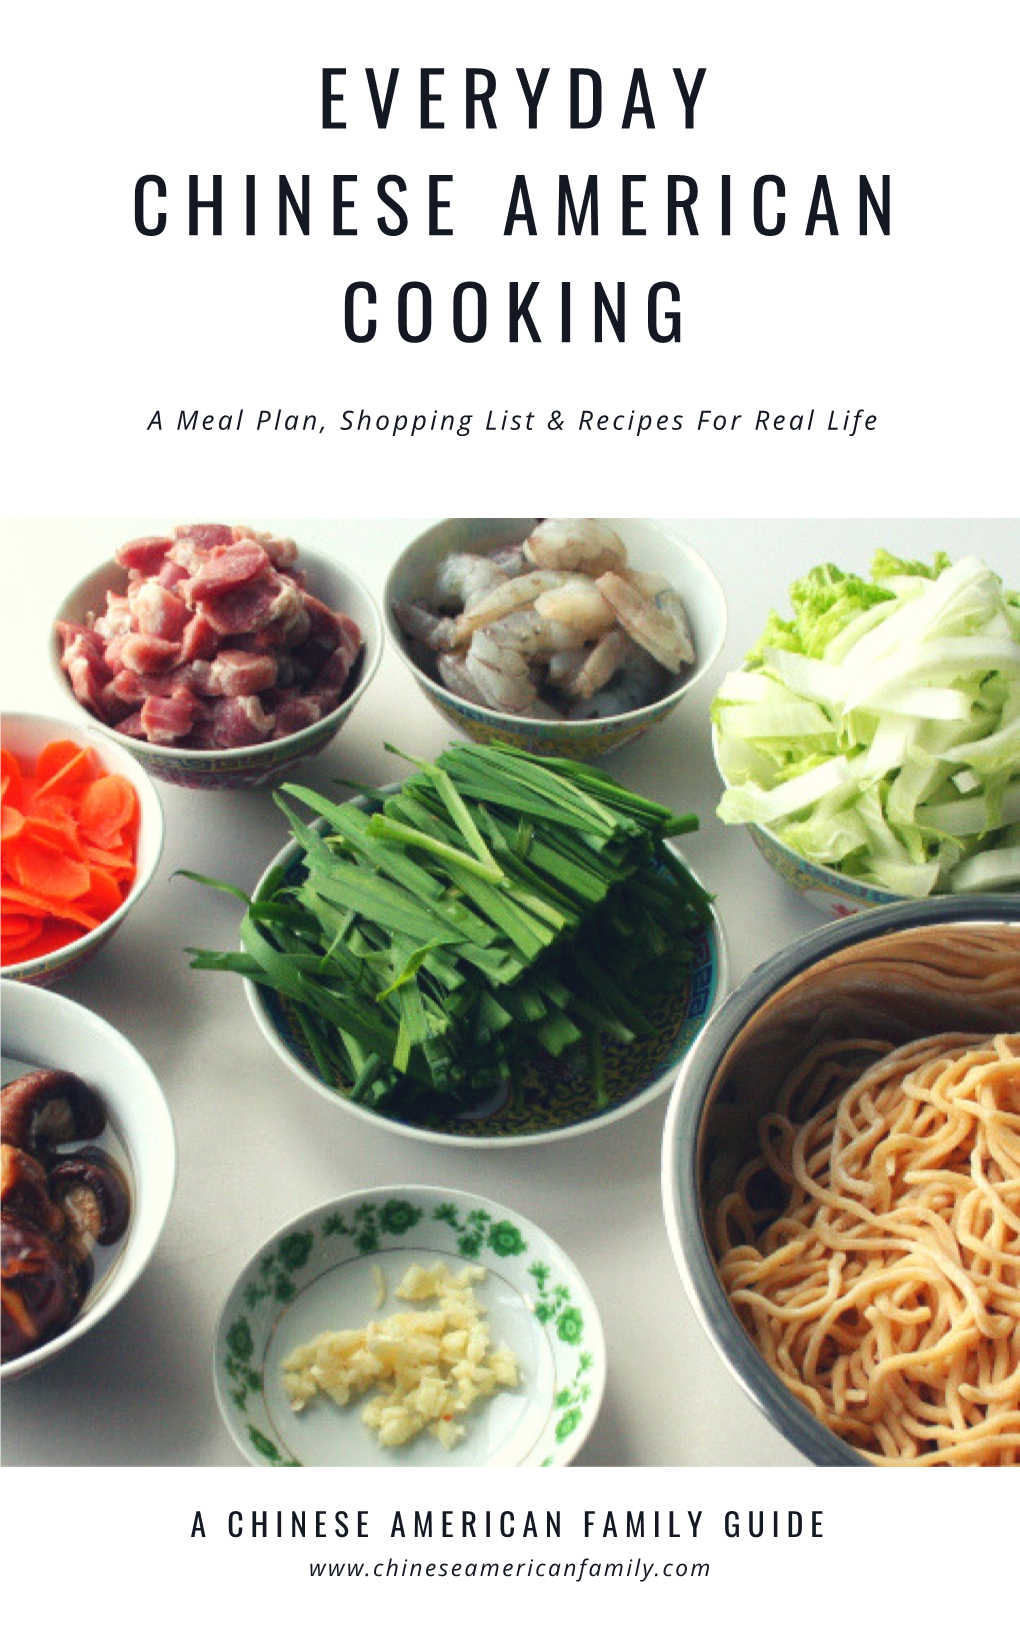 Everyday Chinese American Cooking